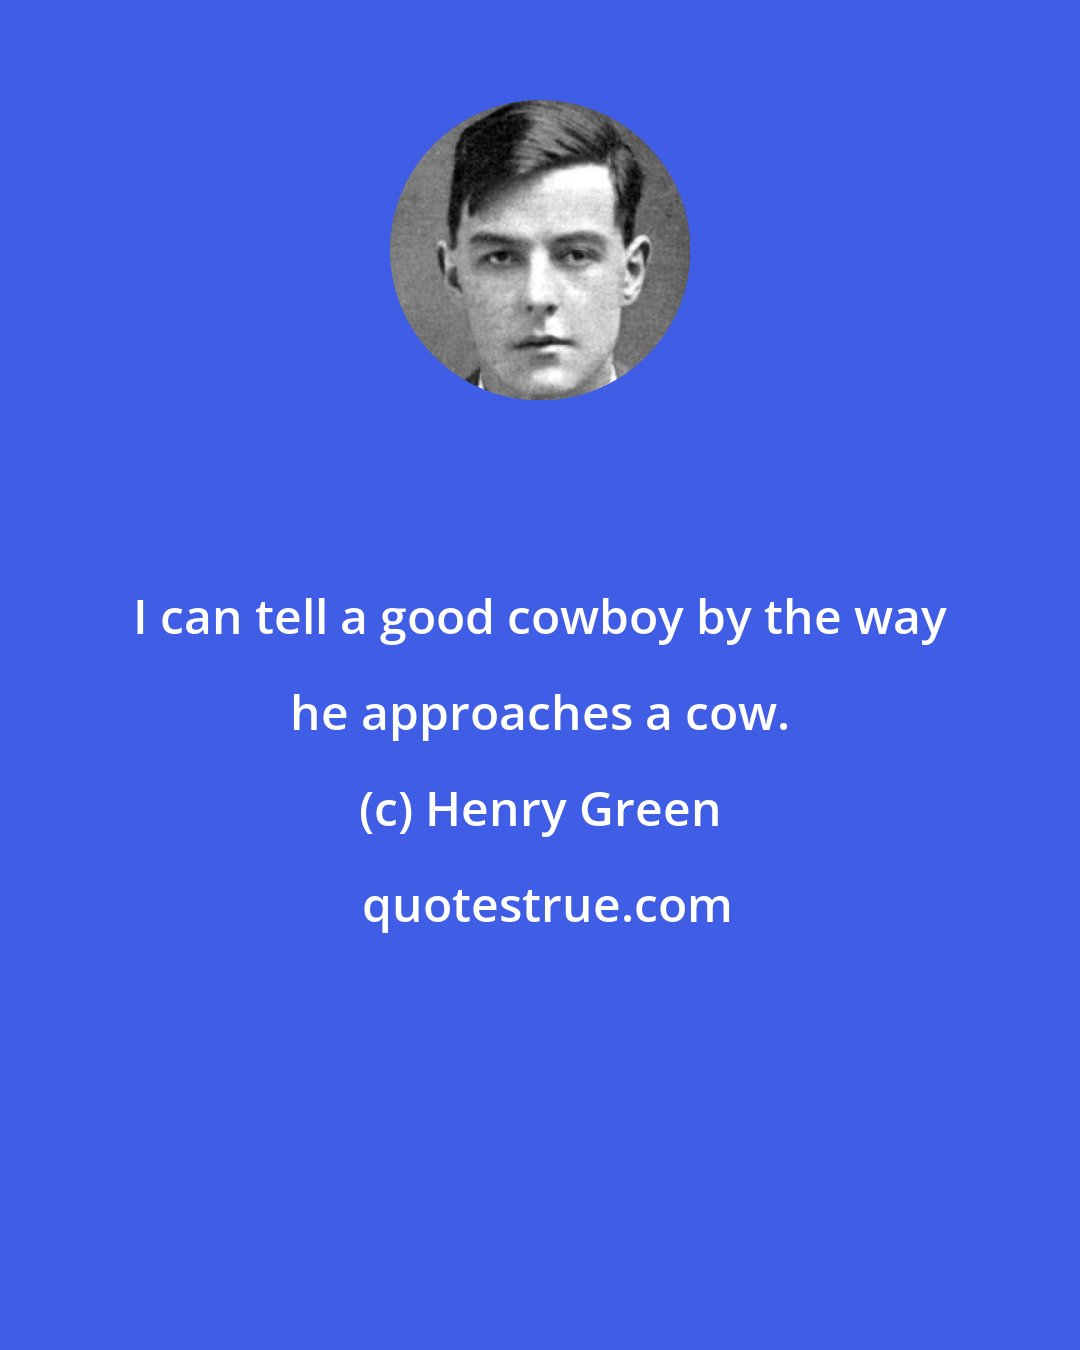 Henry Green: I can tell a good cowboy by the way he approaches a cow.